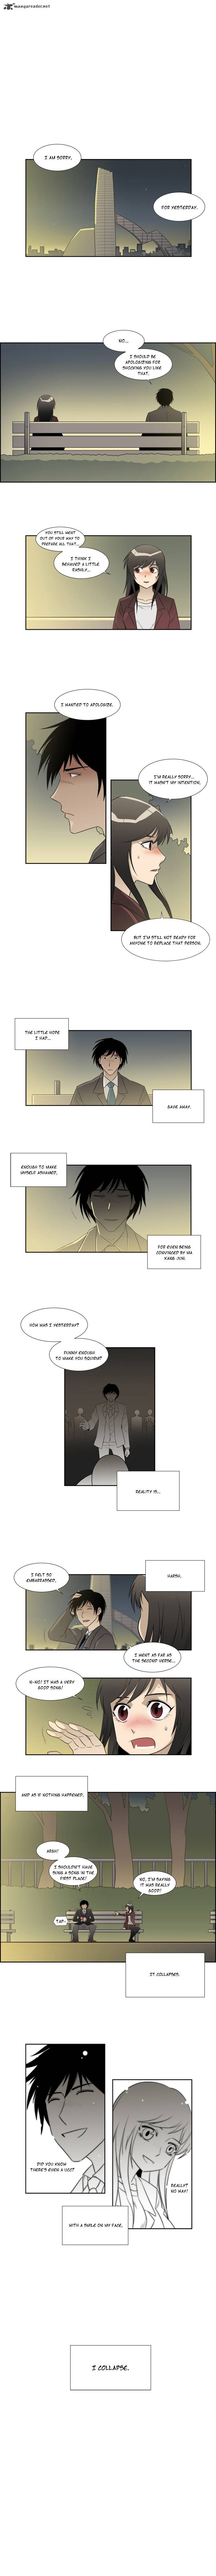 Melo Holic Chapter 12 Page 1